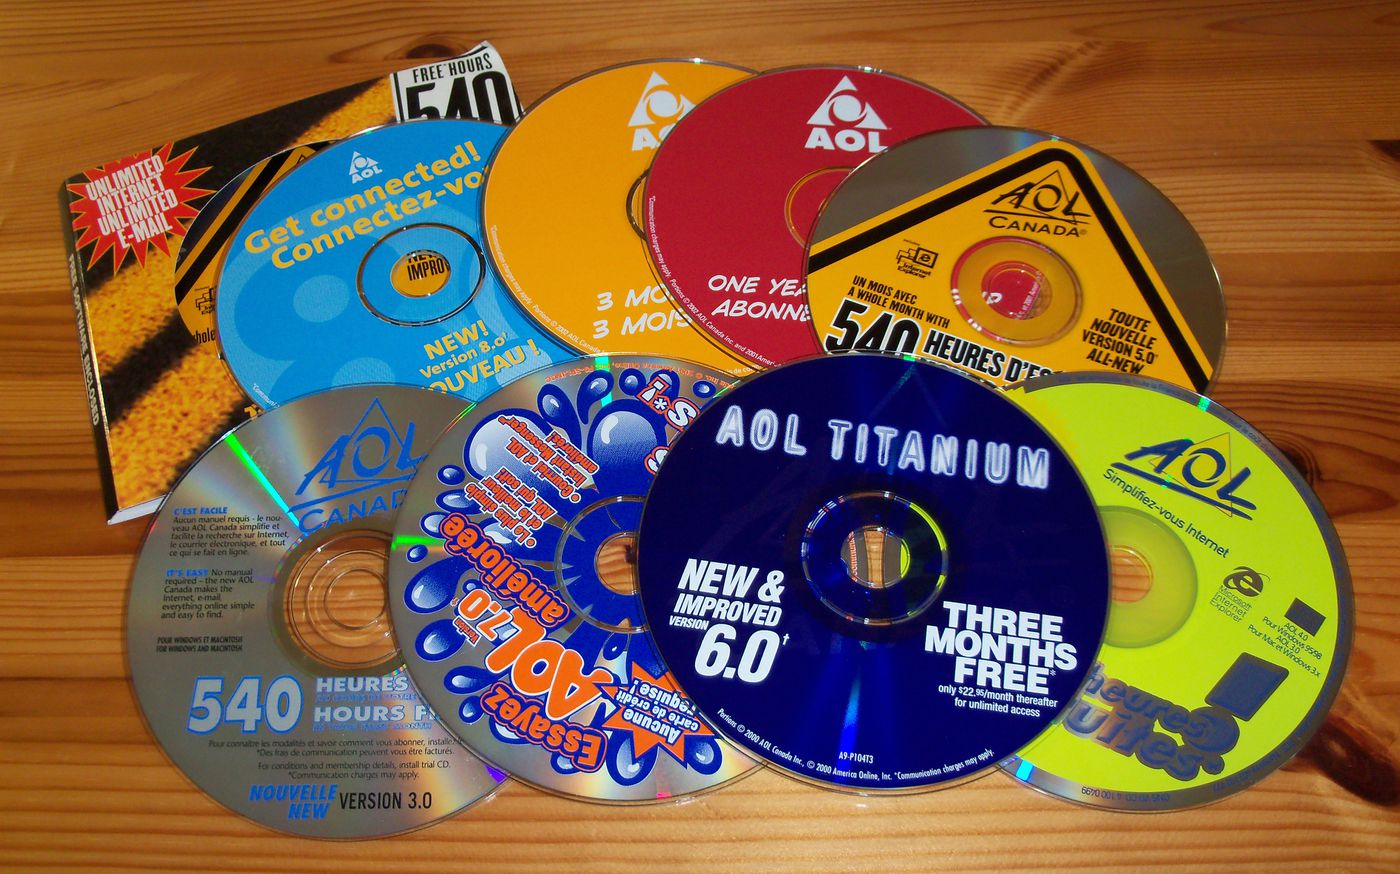 AOL TINY ETC INTERNET SOFTWARE VINTAGE START UP TRIAL DISCS choose your edition 